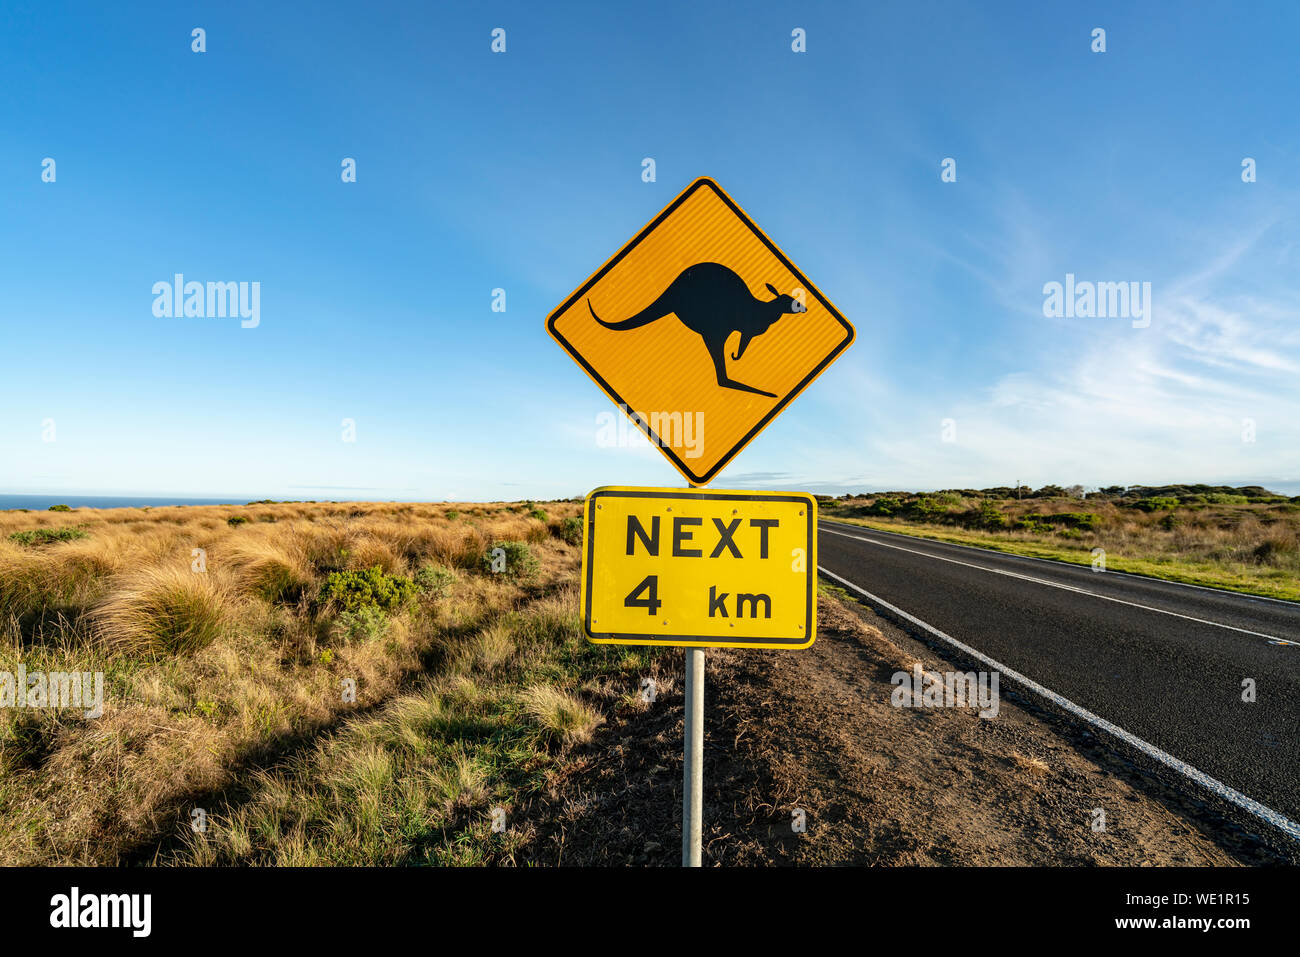 An iconic kangaroo road sign against a blue sky on the Great Ocean Road in Victoria, Australia Stock Photo